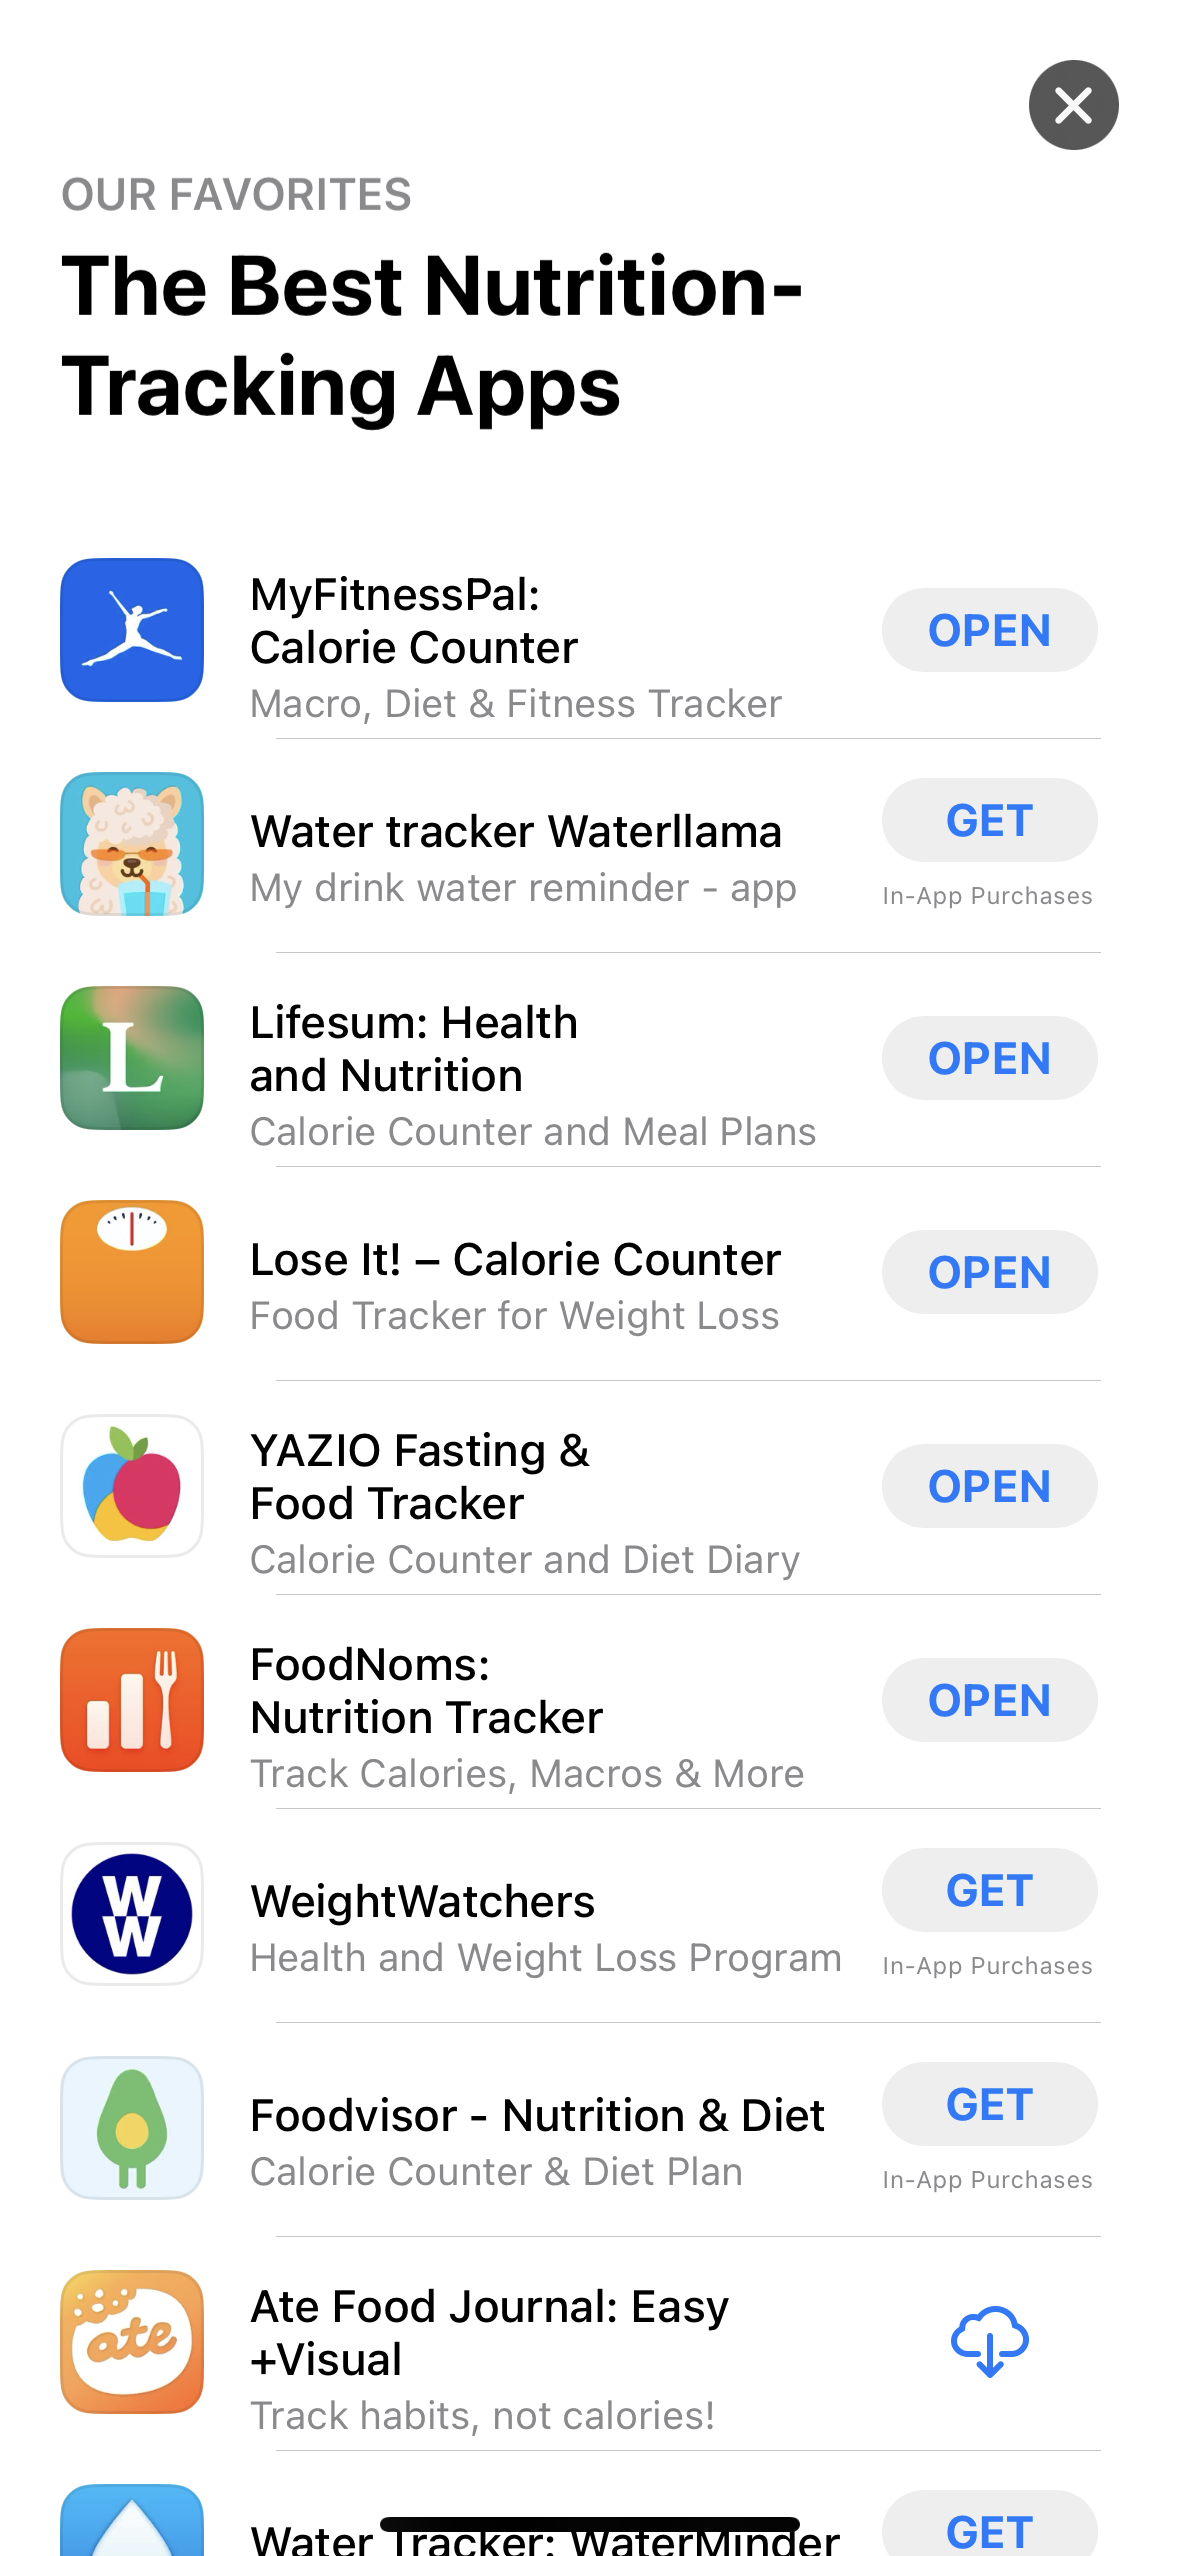 Screenshot of Best Nutrition Tracking Apps list in the App Store, FoodNoms included.